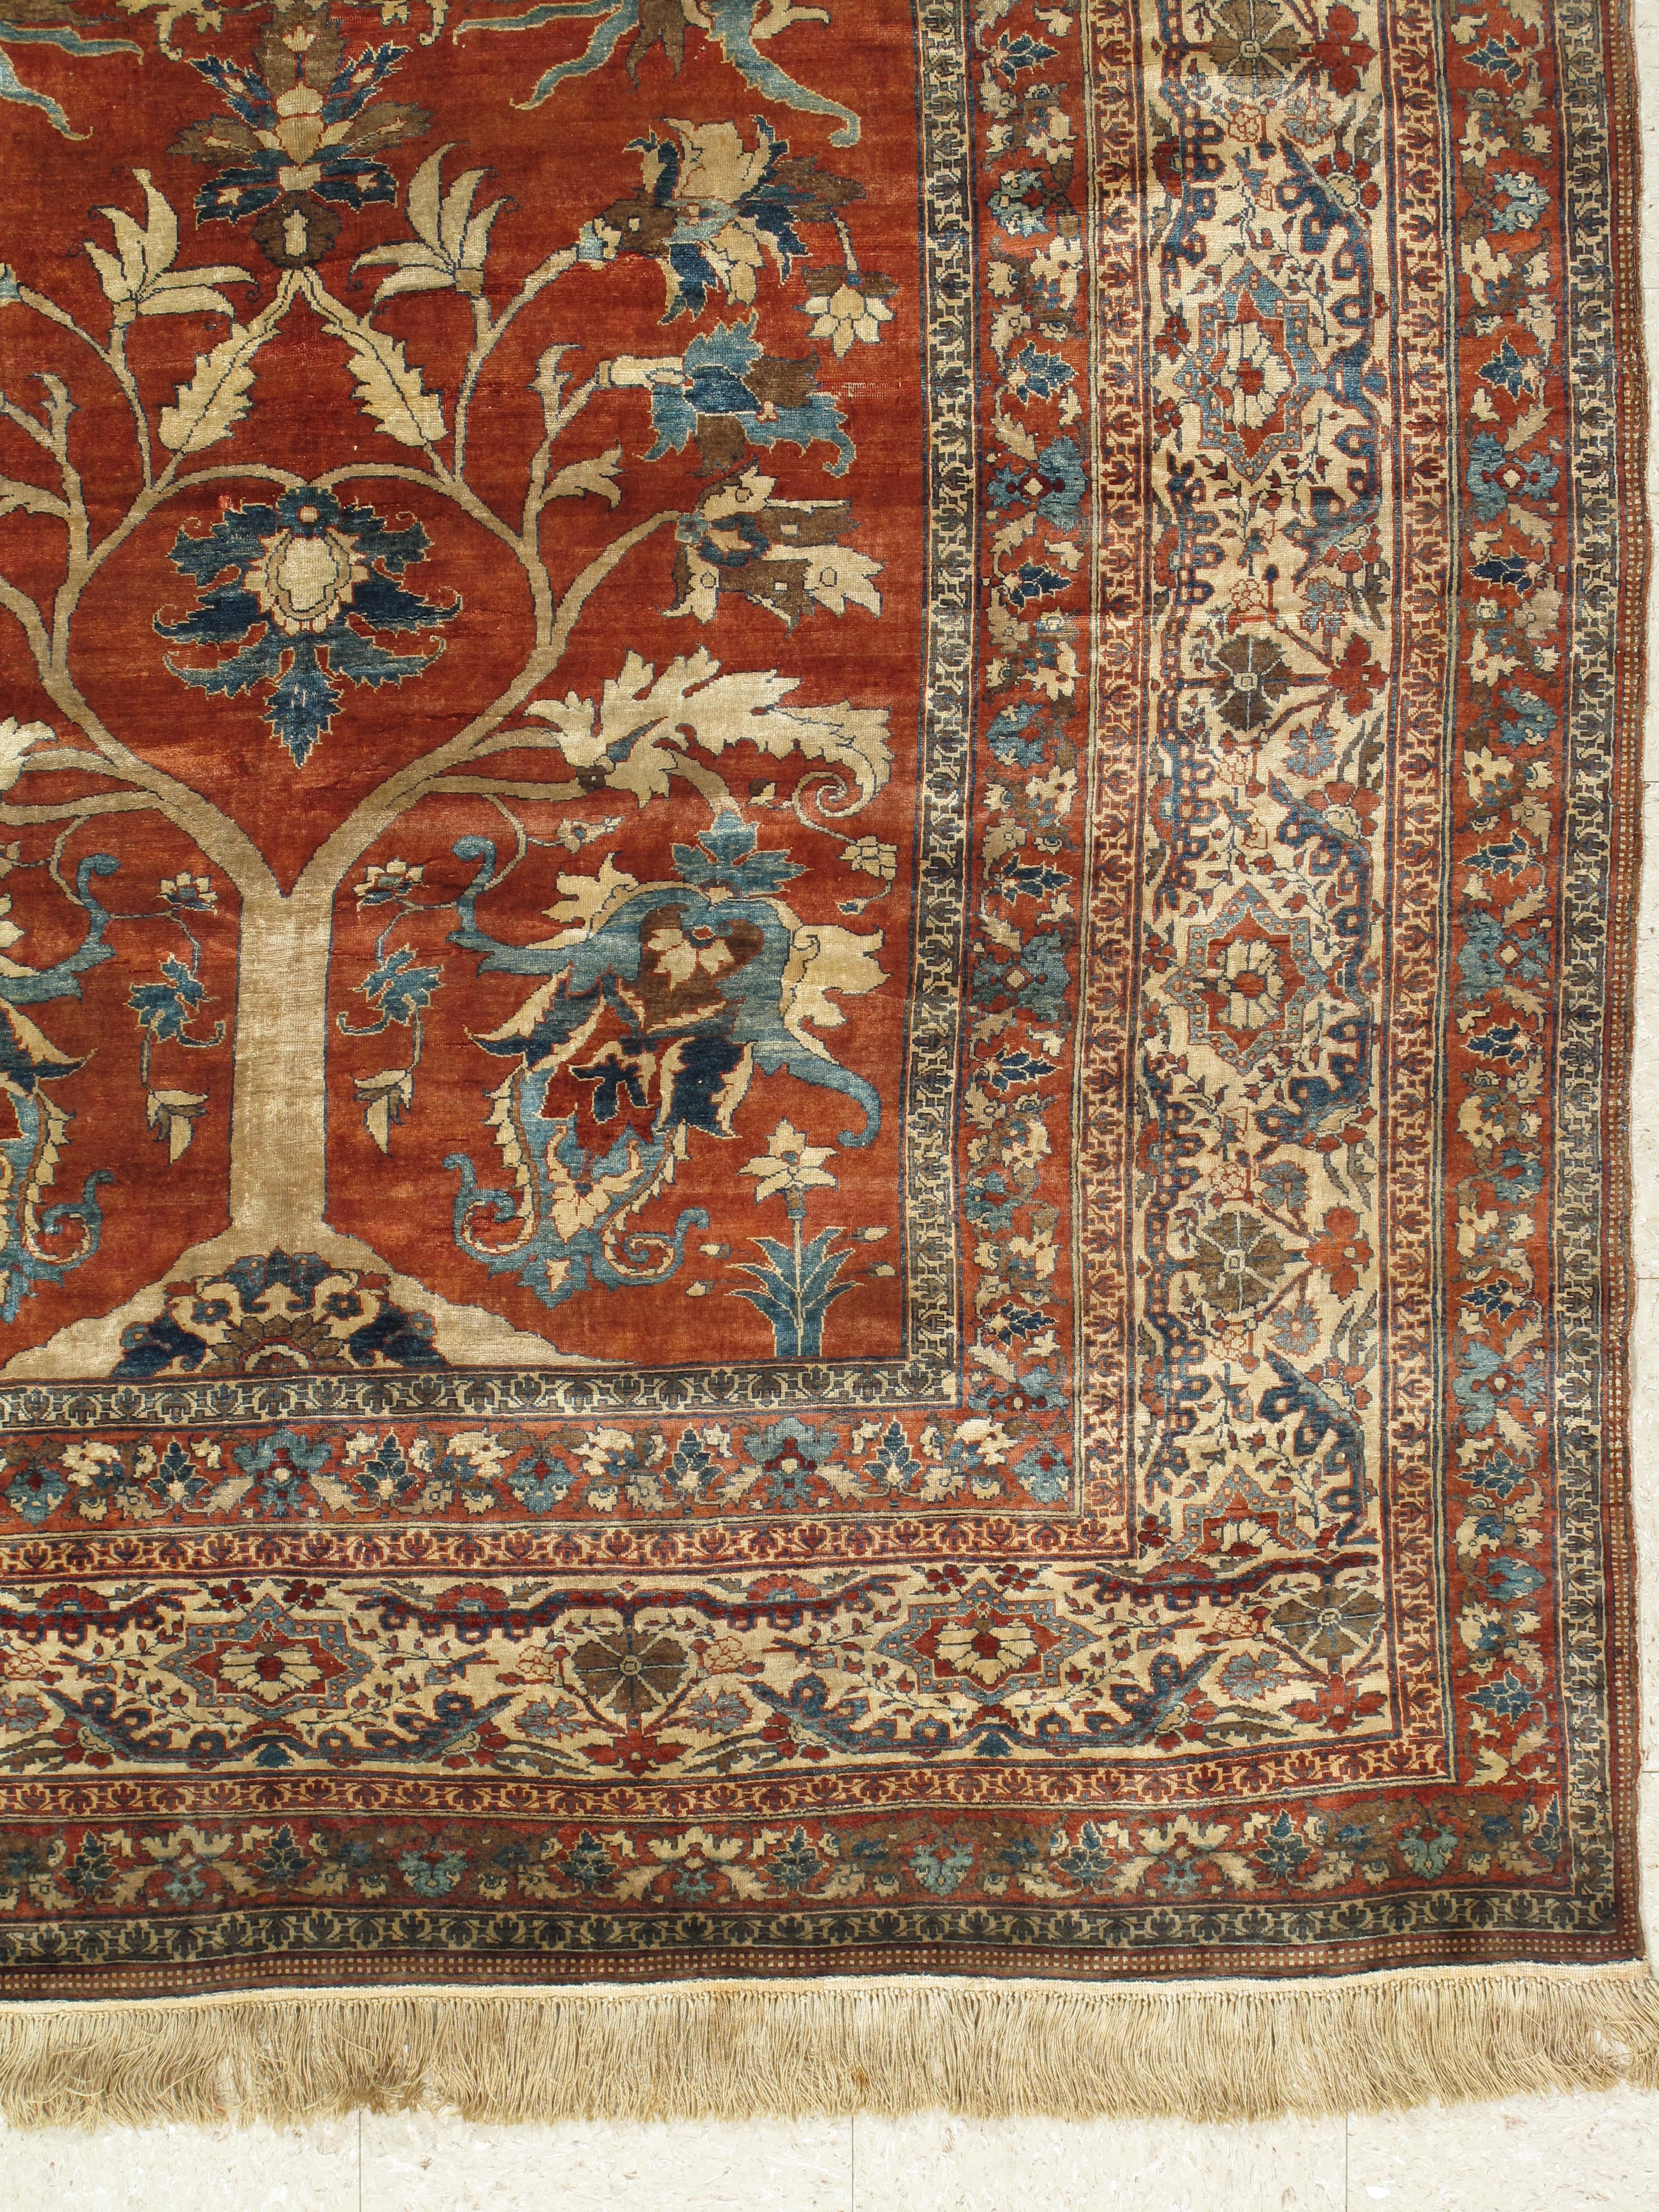 Antique Heriz wool carpets are renowned for their crisp, abstract geometric interpretation of classical Persian rug design. Heriz carpets woven in silk, however, are quite distinct and tend to preserve the fluid, sinuous arabesque detail of